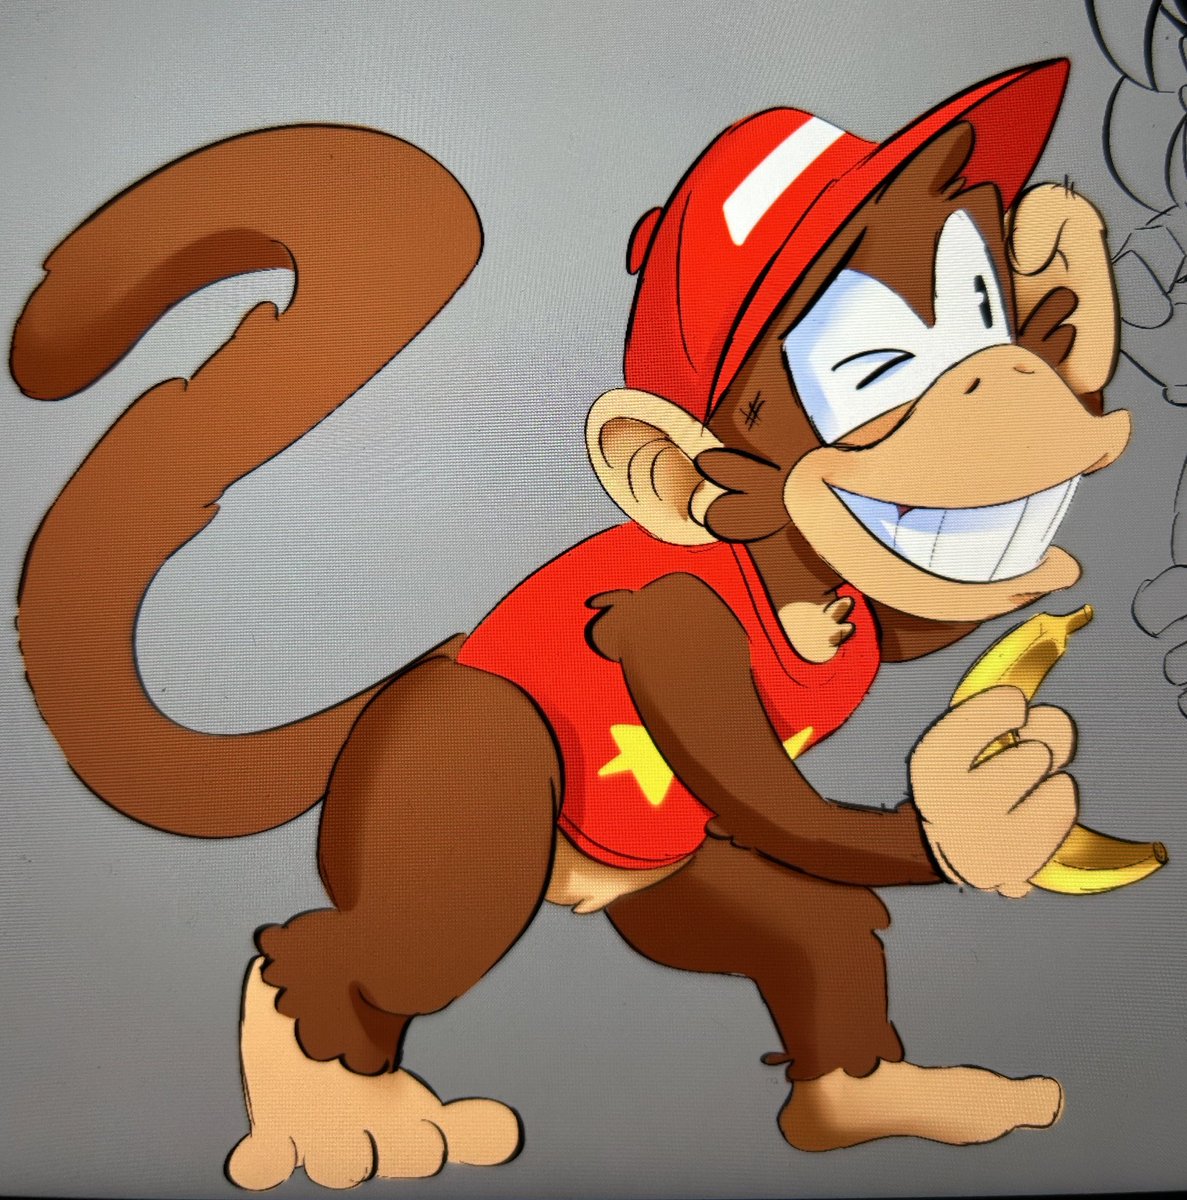 Ima ramble a bit but diddy is more fun to play then dk on dk country. I will ALWAYS SIDE WITH DIDDY!! 😭 Anyways! Here’s a drawing of him! Y’all can guess who’s next to him #diddykong